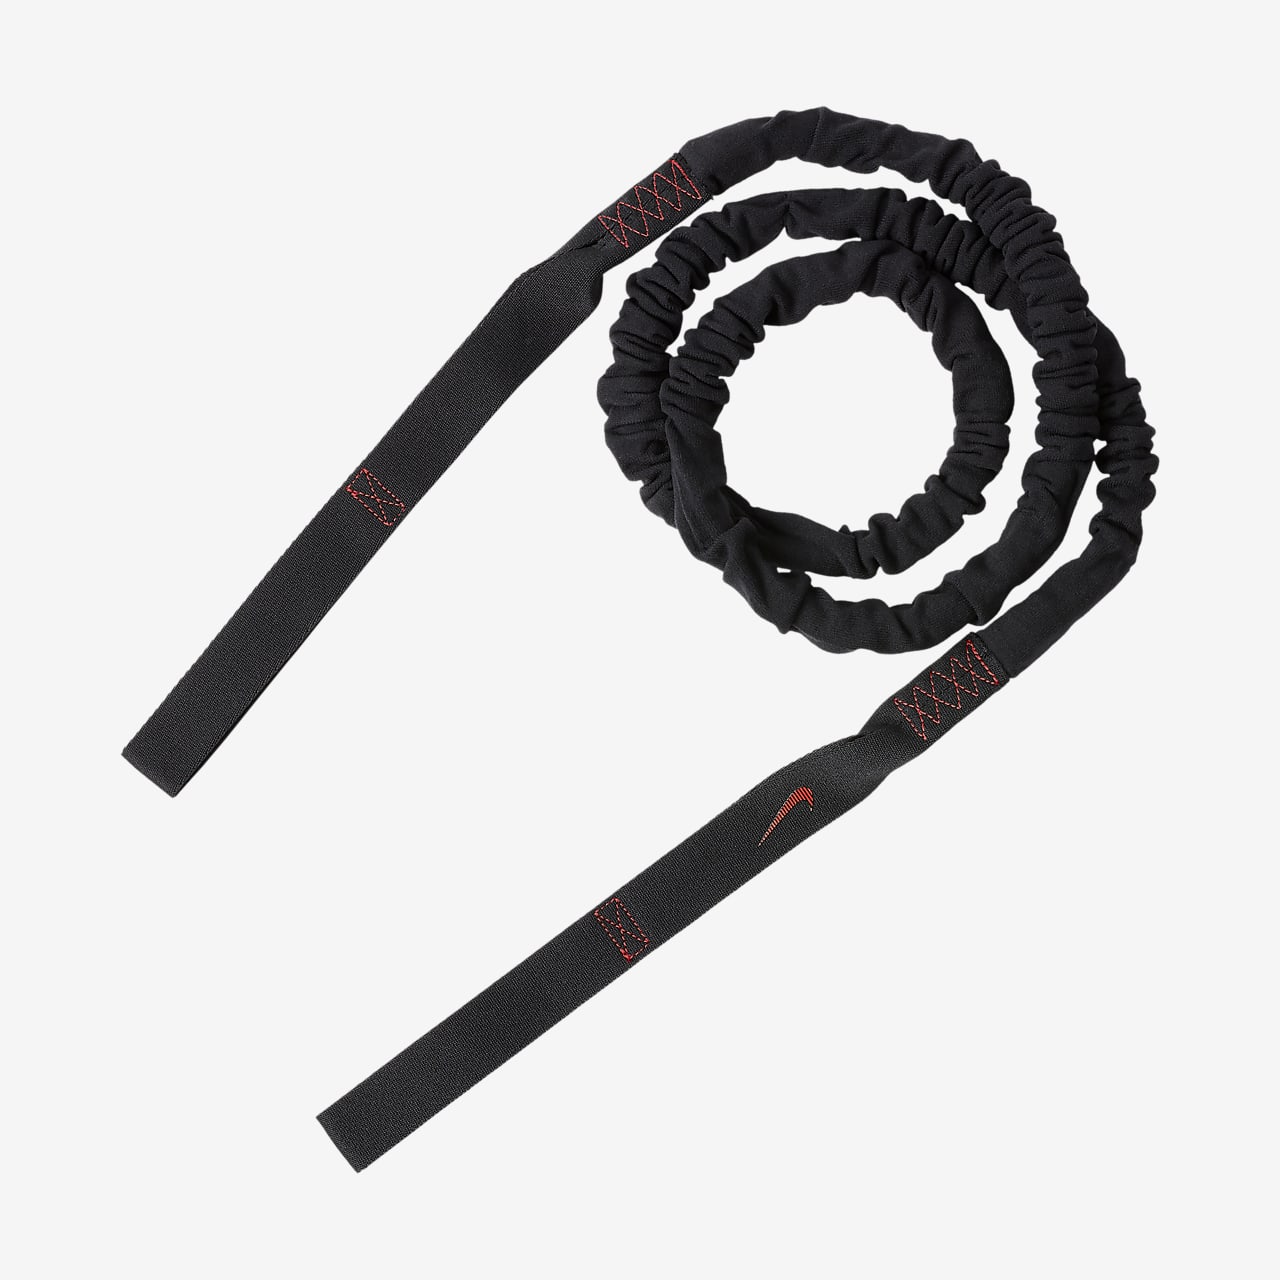 nike heavy resistance band